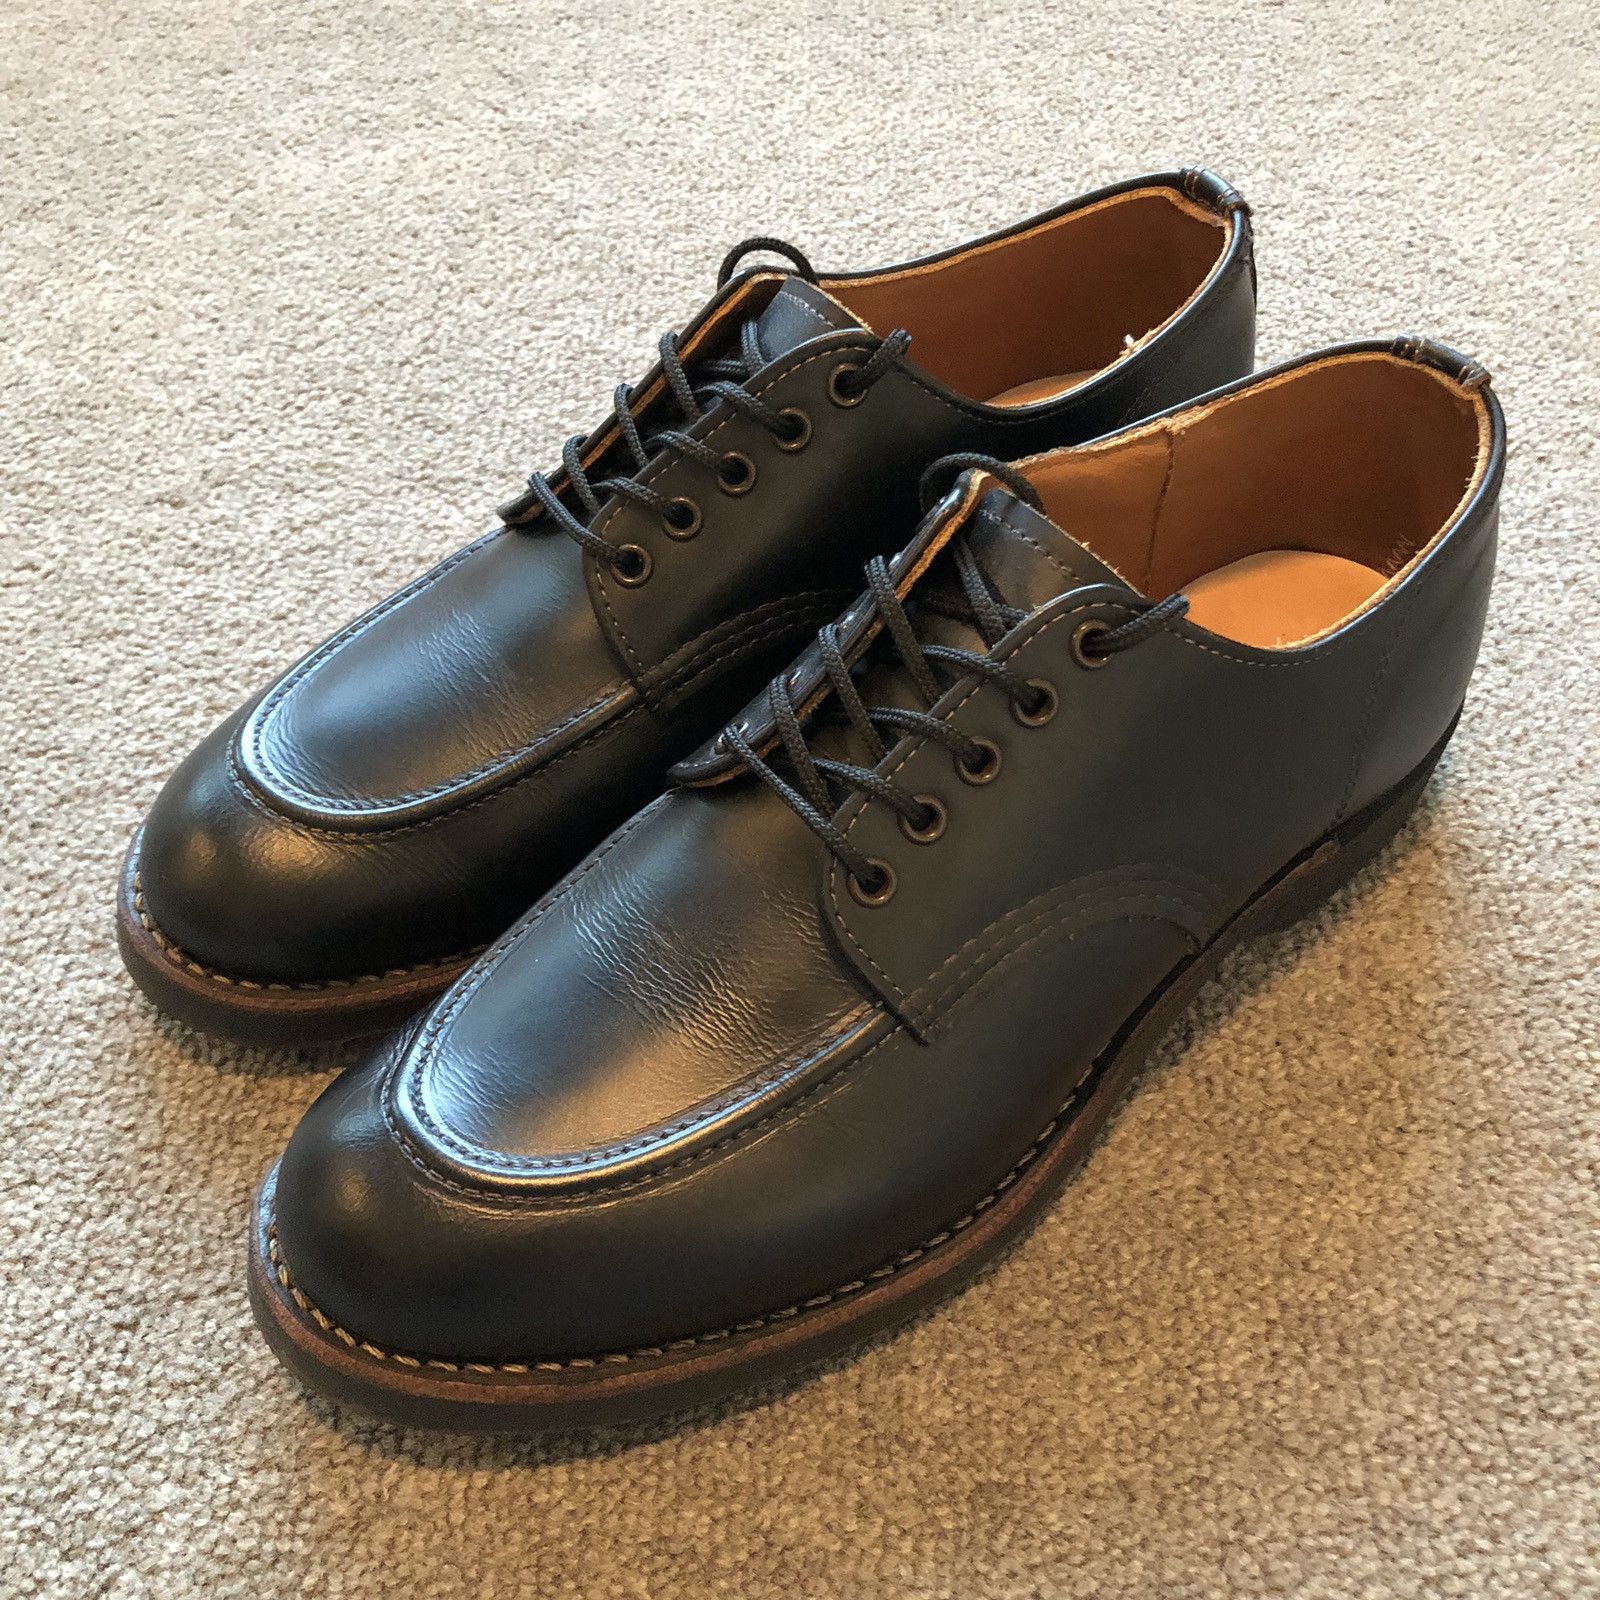 Red Wing 1930's Sports Oxfords 8070 | Grailed